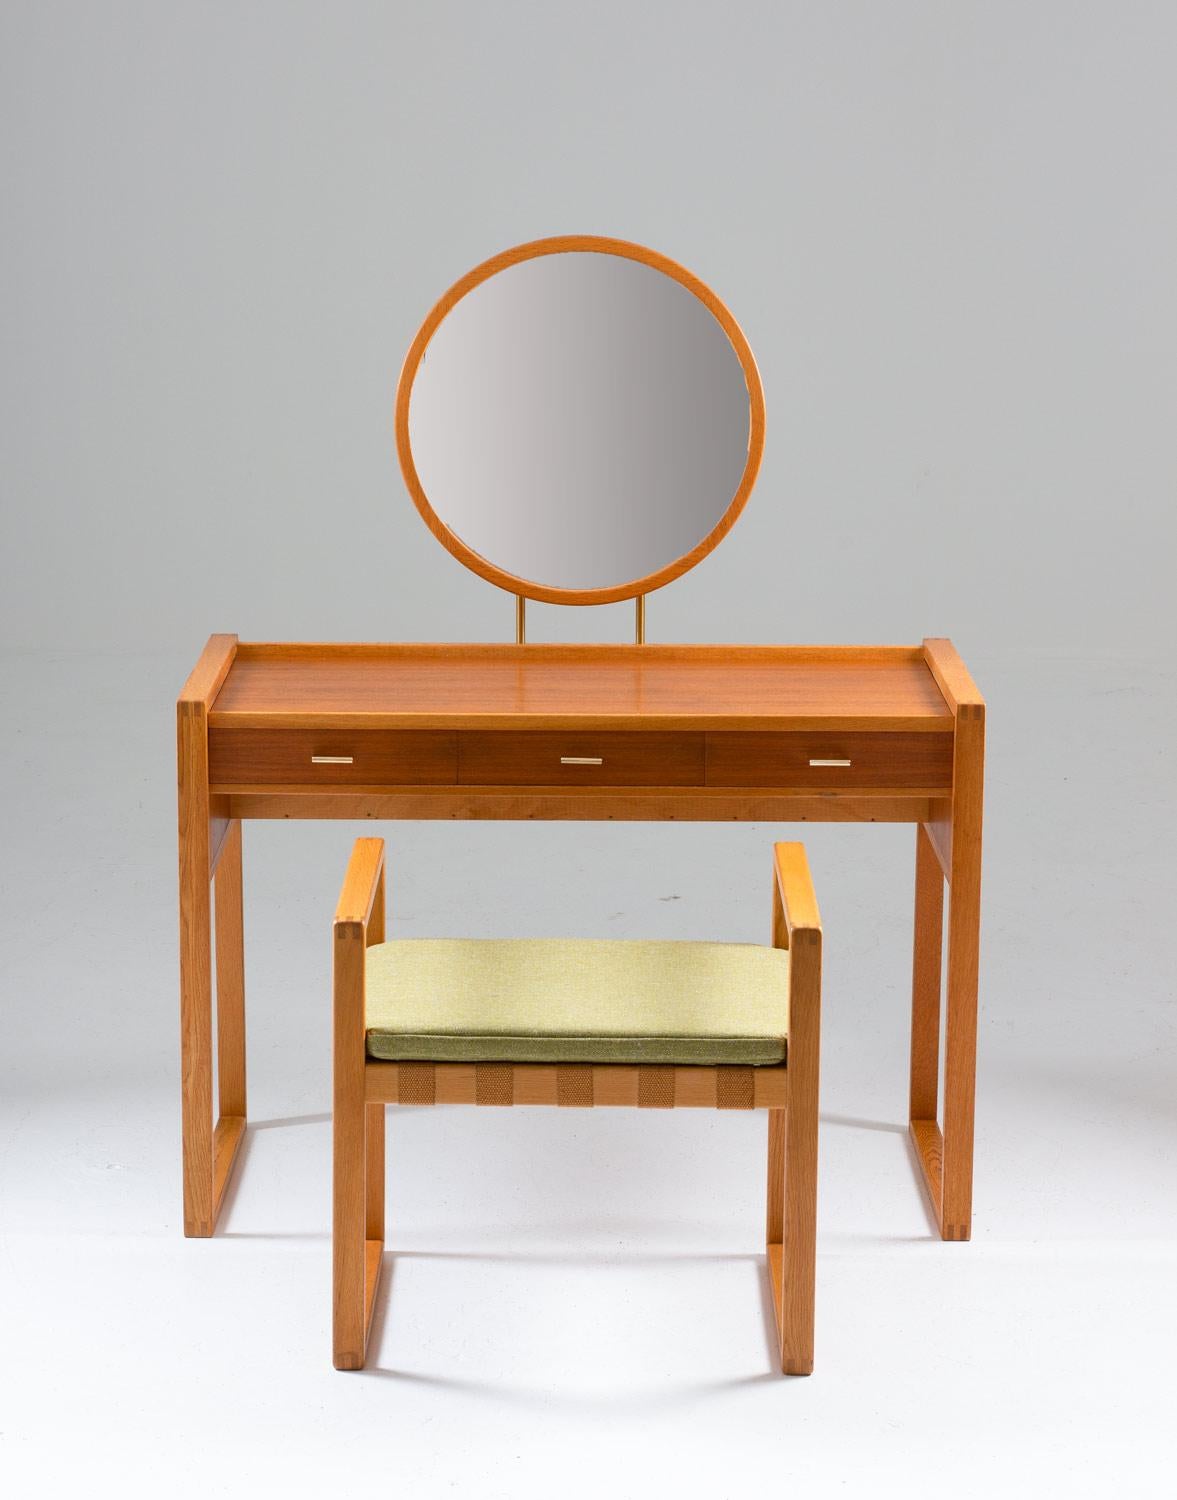 Elegant vanity table with stool by AB Nybrofabriken, Fröseke, Sweden.
This vanity table mixes simplicity and details in a superb way. The handles for the drawers and the mirror stand are made of brass, and the table is made of teak with details in